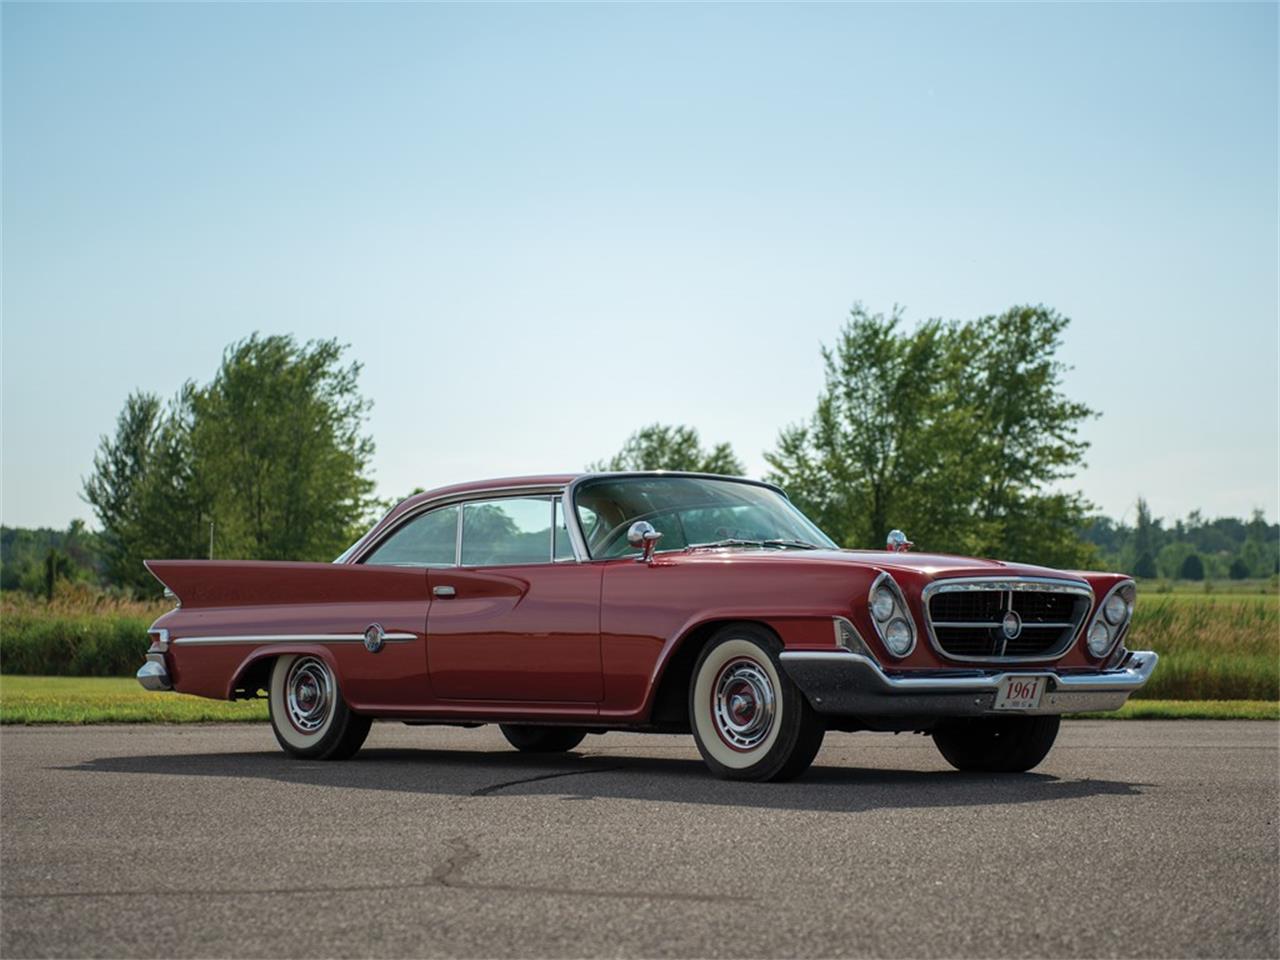 For Sale at Auction: 1961 Chrysler 300 for sale in Auburn, IN